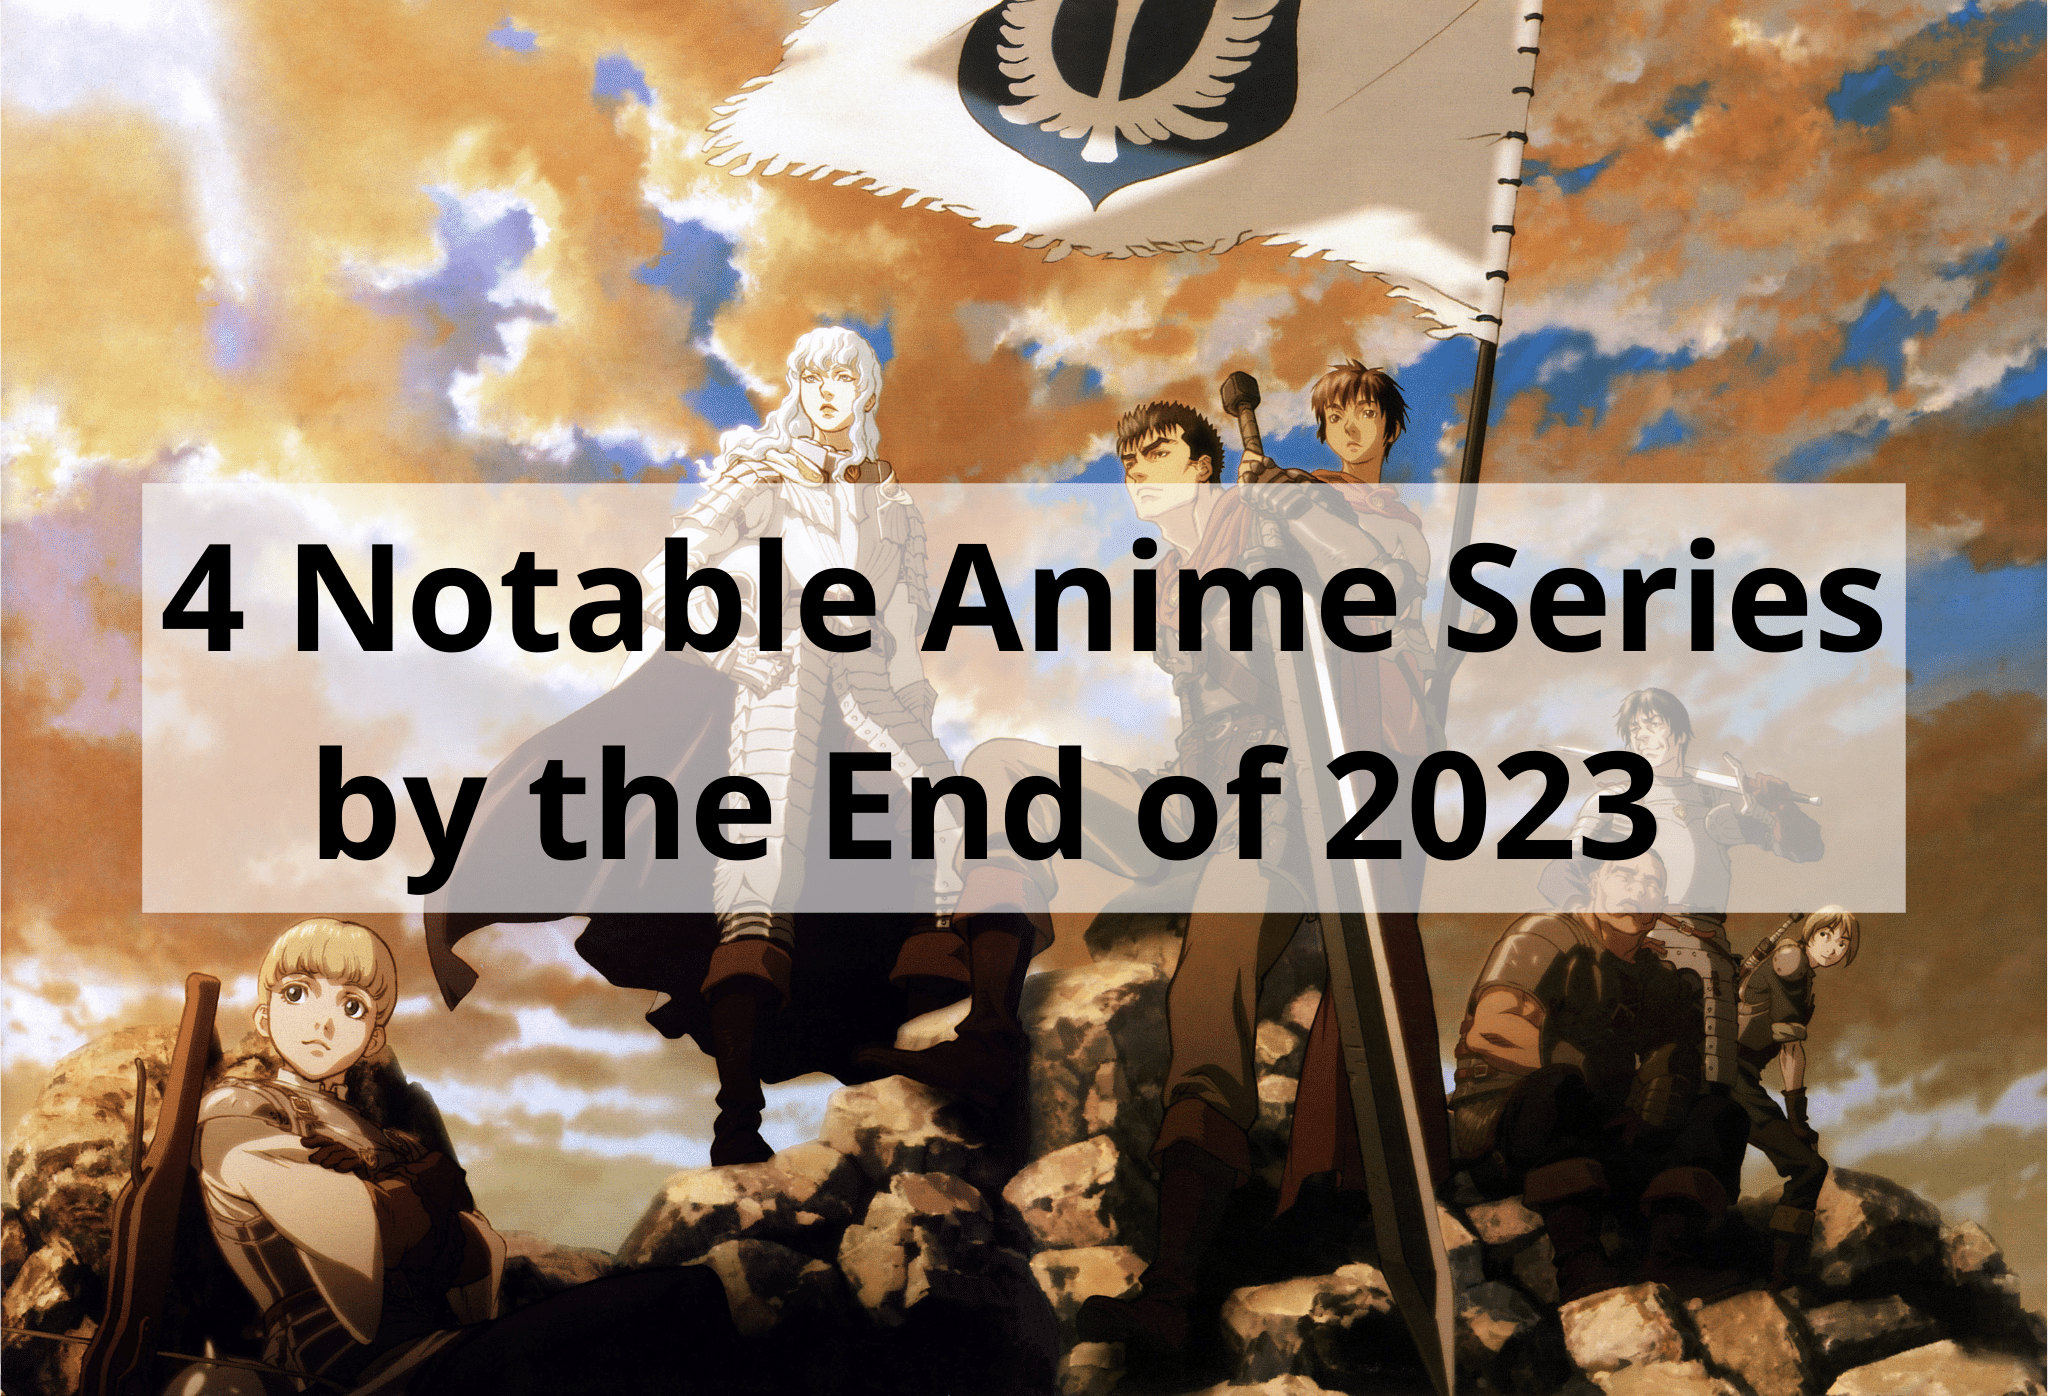 4 Notable Anime Series by the End of 2023